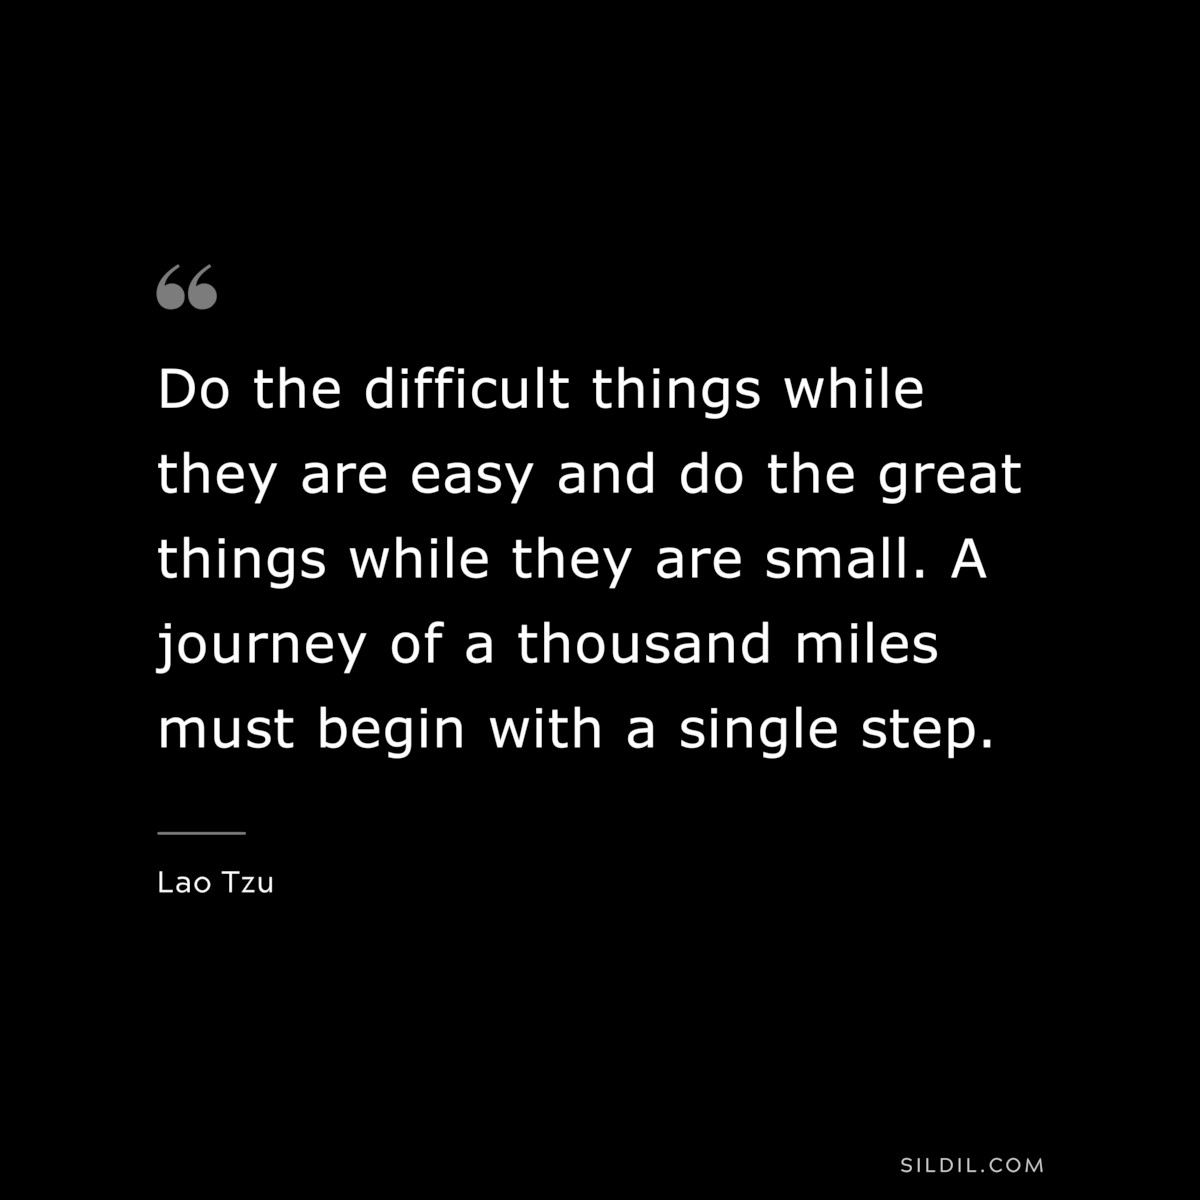 Do the difficult things while they are easy and do the great things while they are small. A journey of a thousand miles must begin with a single step. ― Lao Tzu